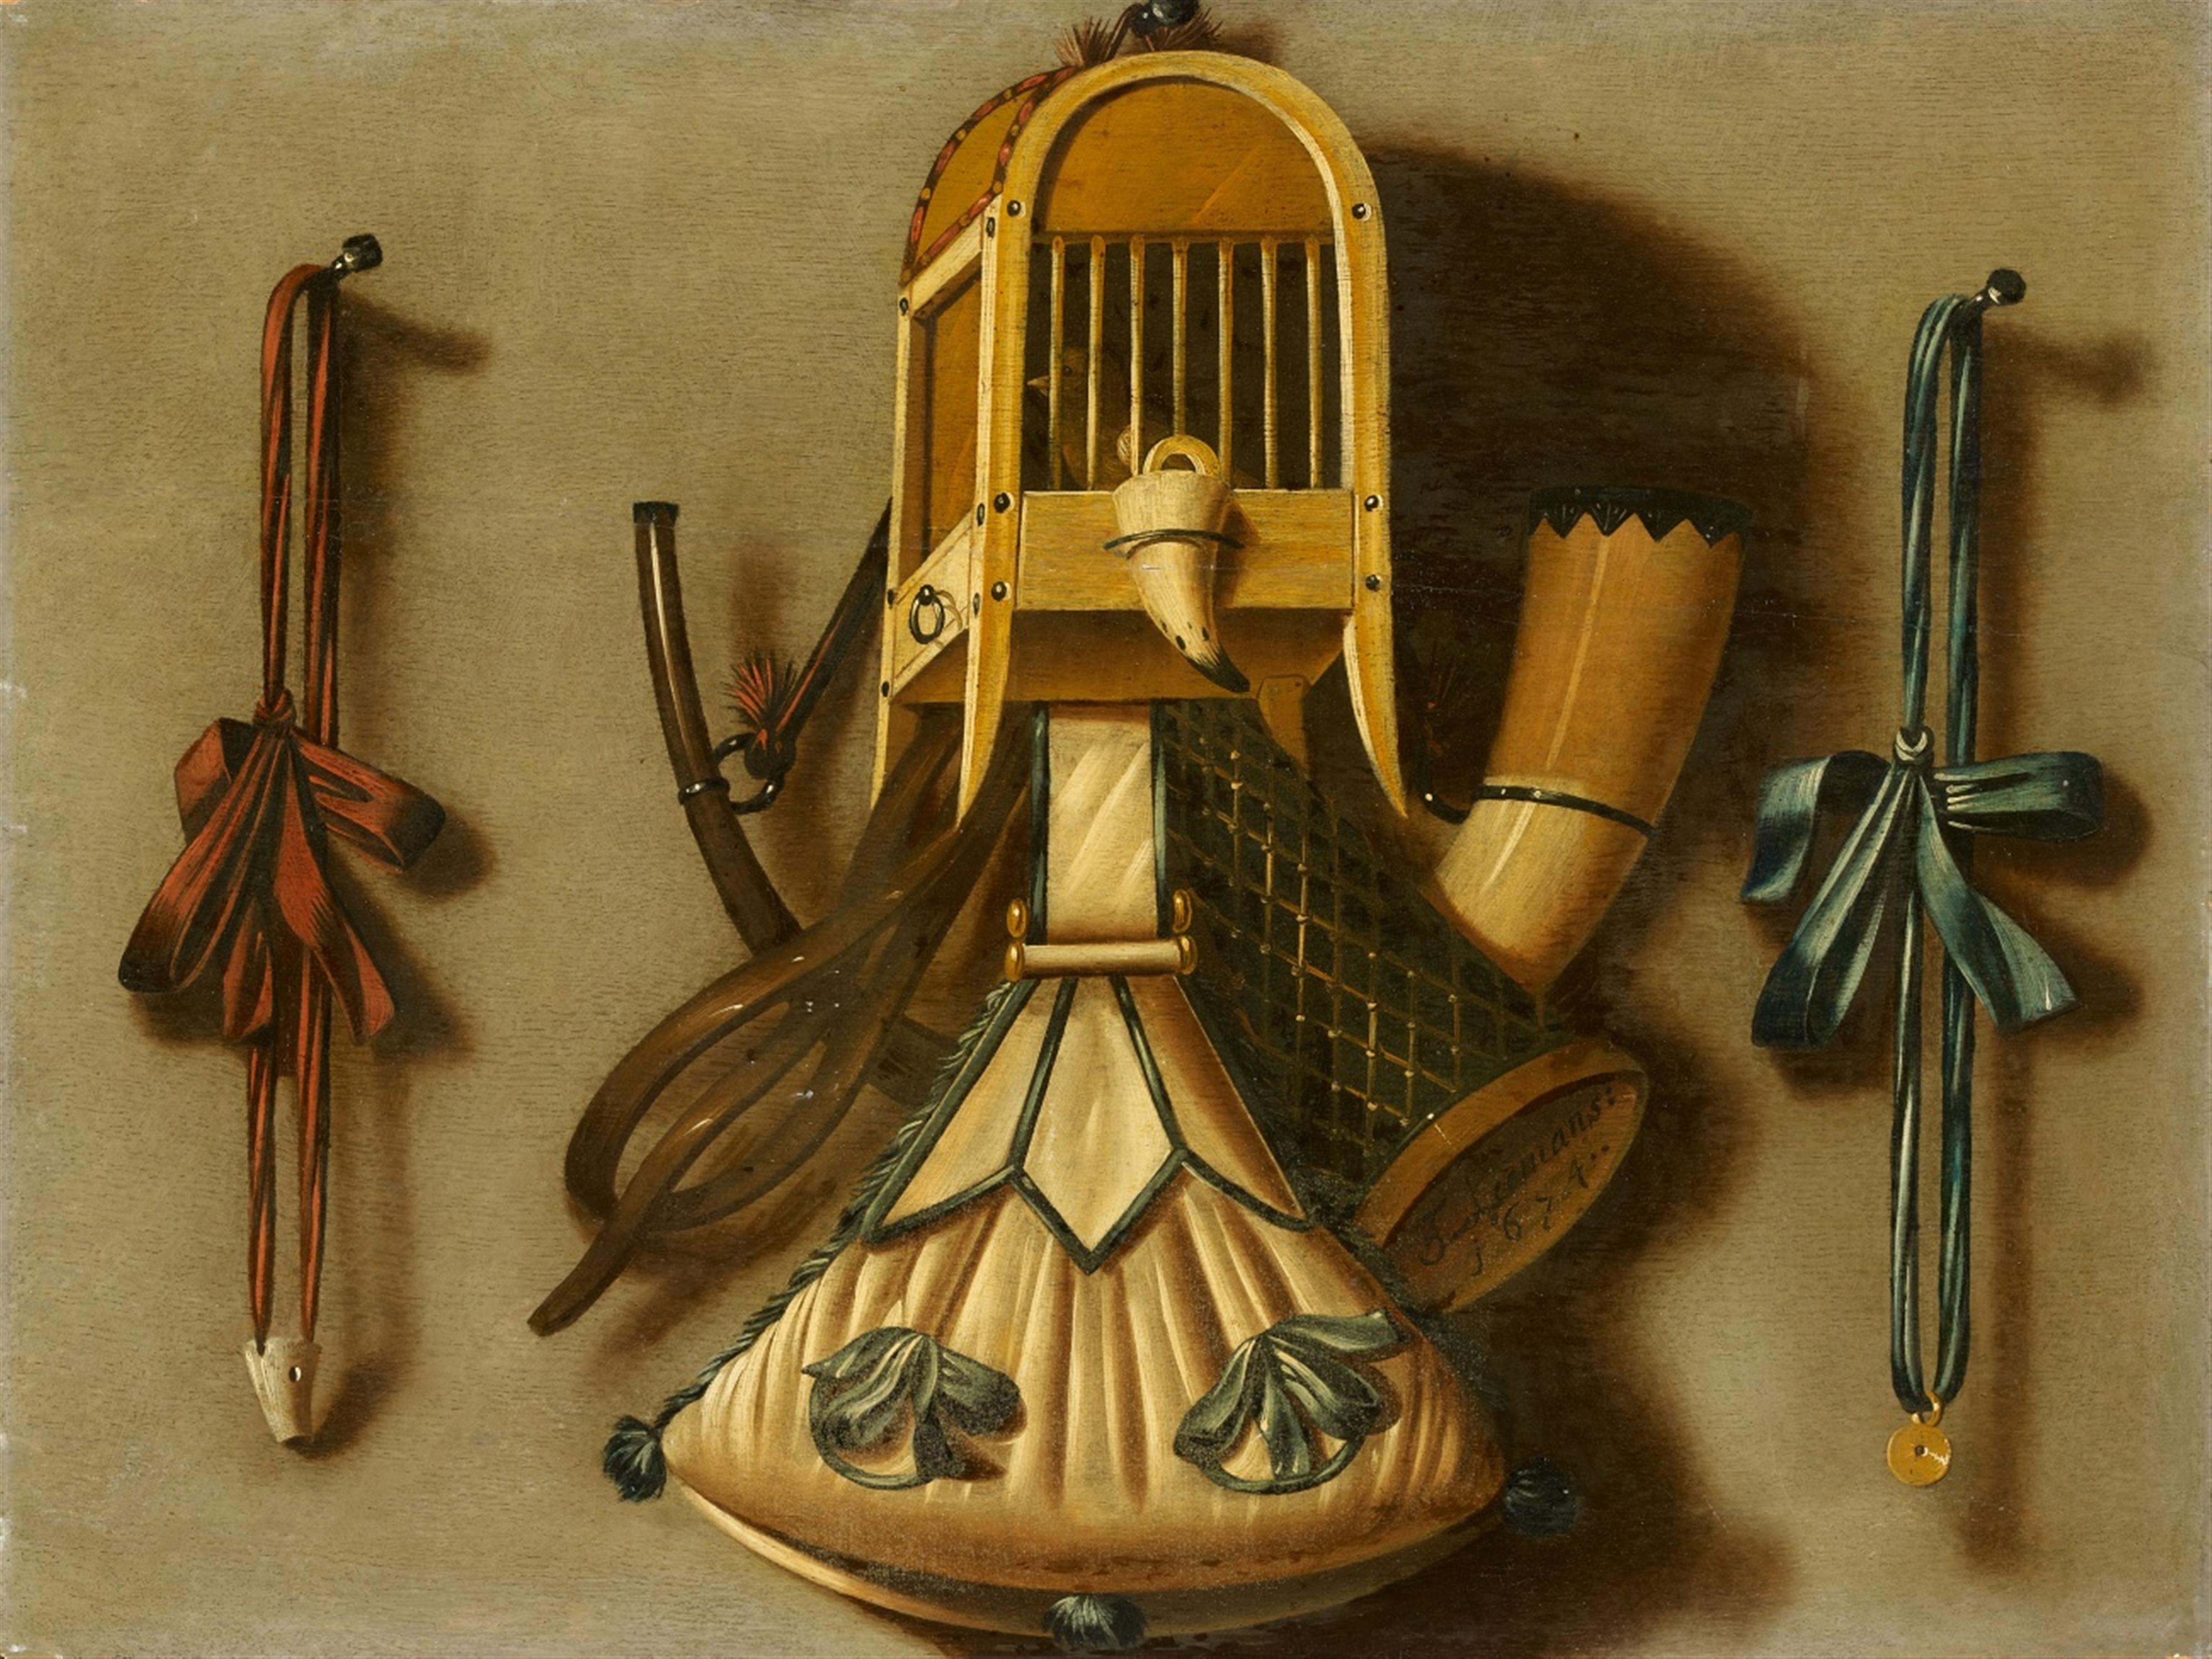 Johannes Leemans - Trompe l'oeil with a Bird Cage and Hunting Equipment - image-1